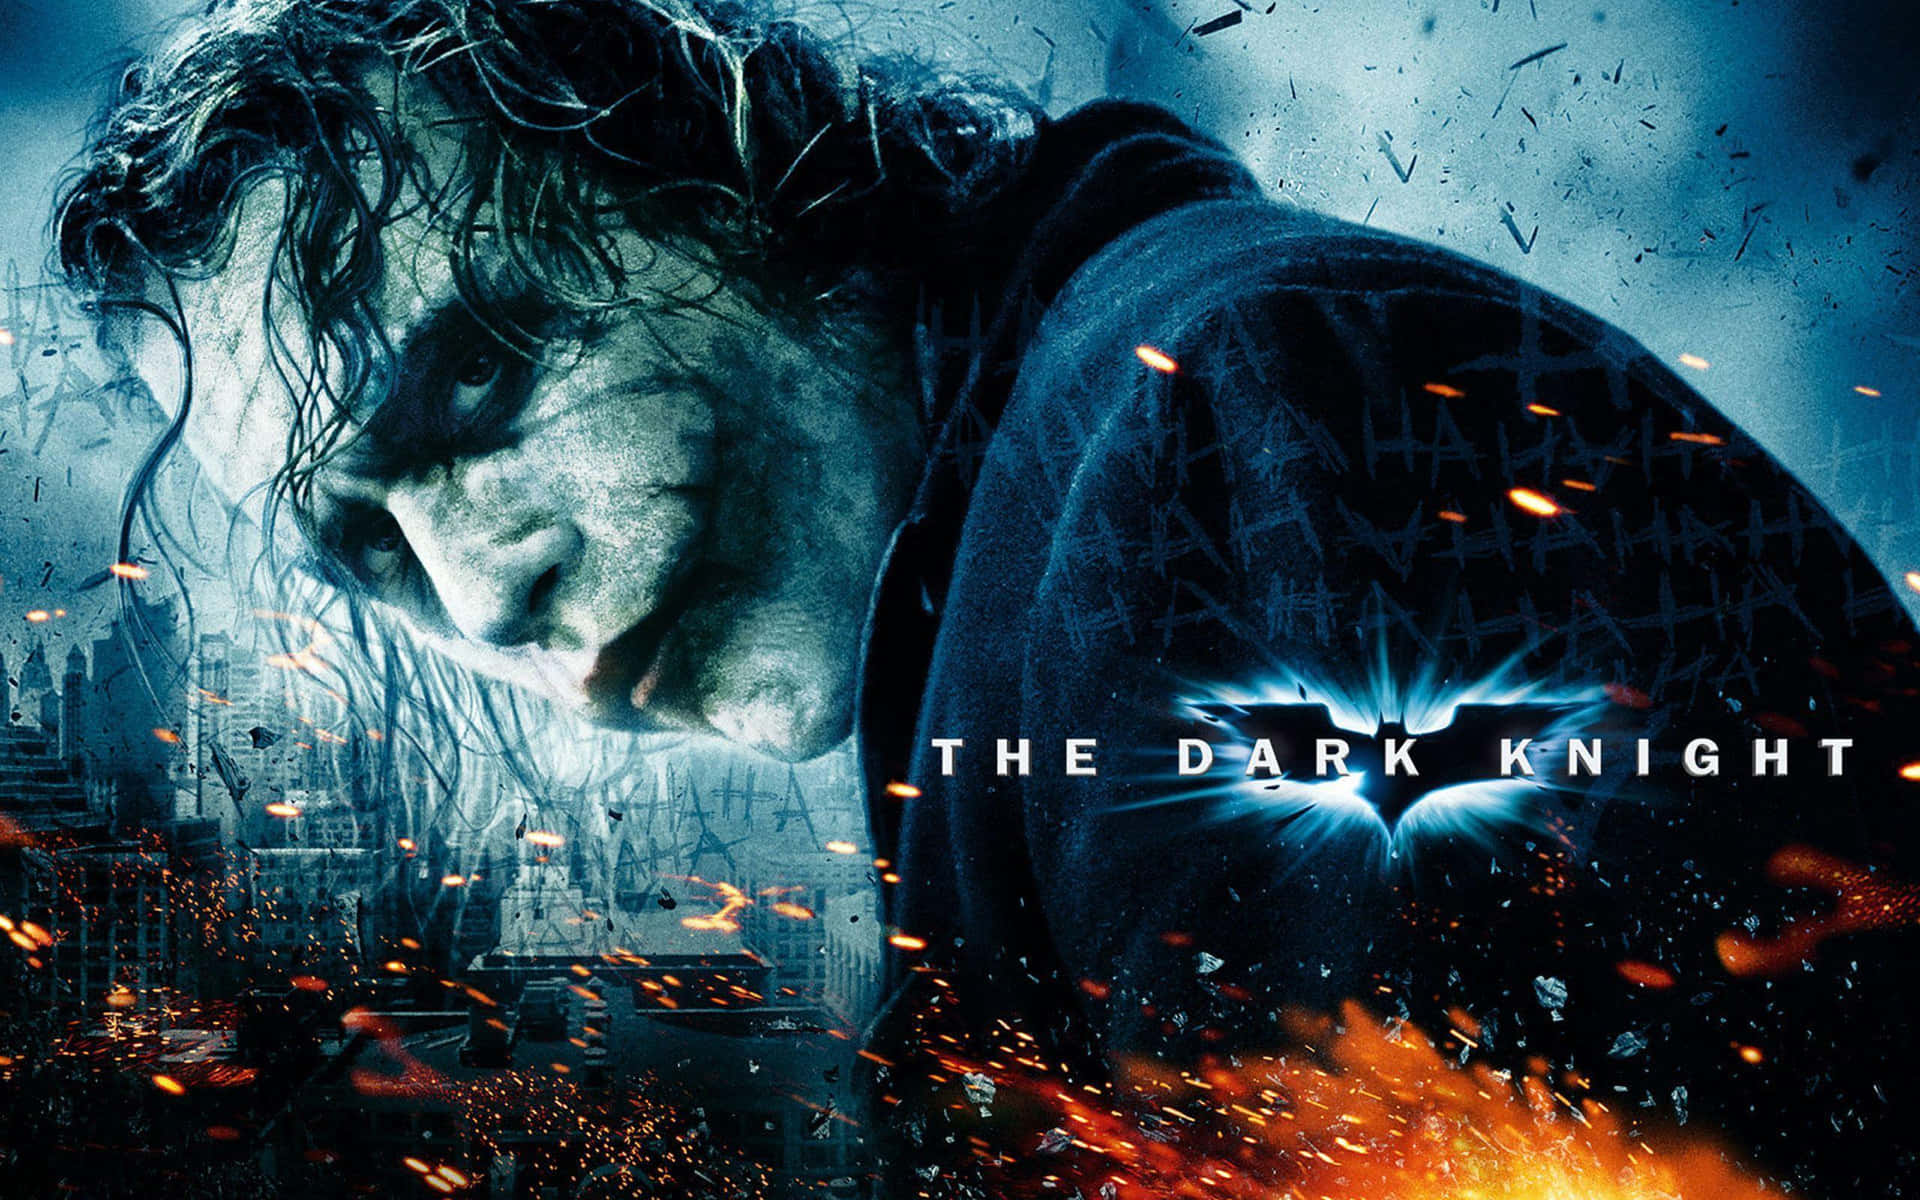 The Dark Knight Movie Poster With The Joker